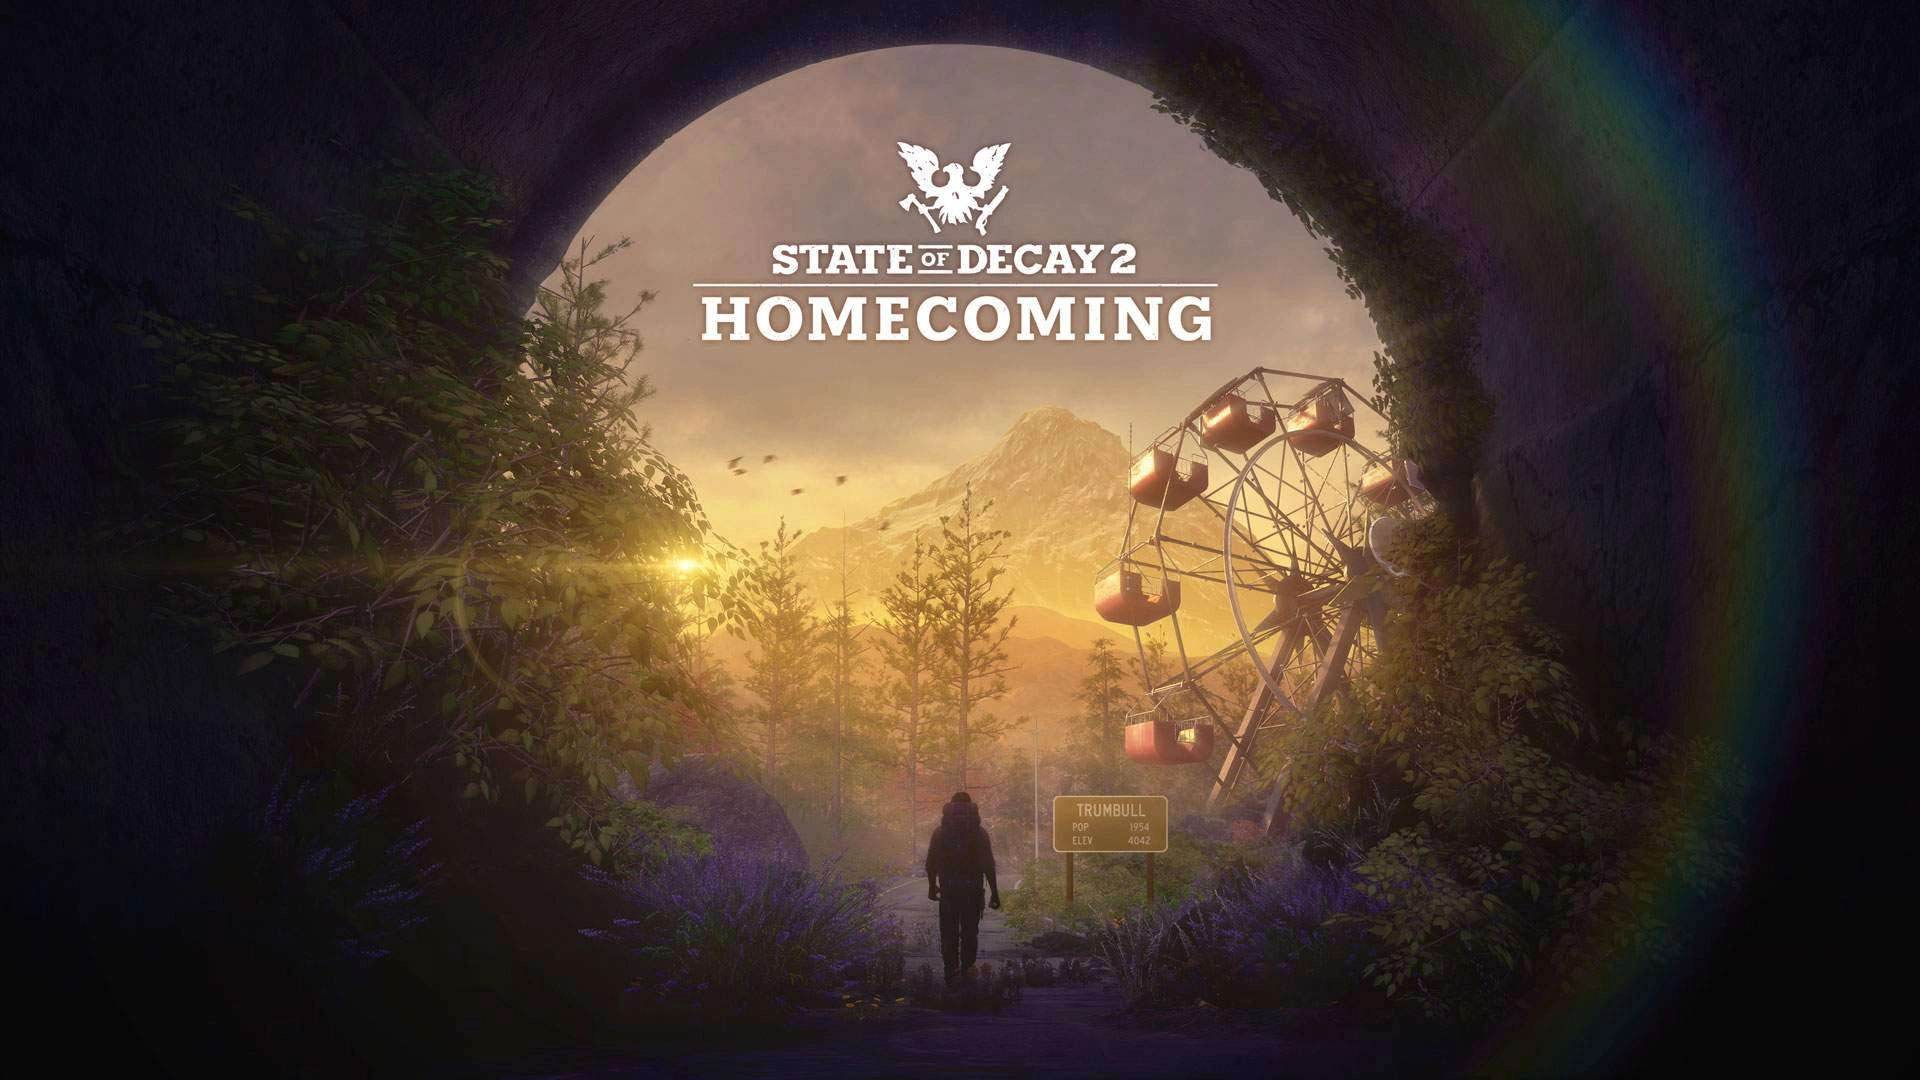 State of Decay 2: Homecoming